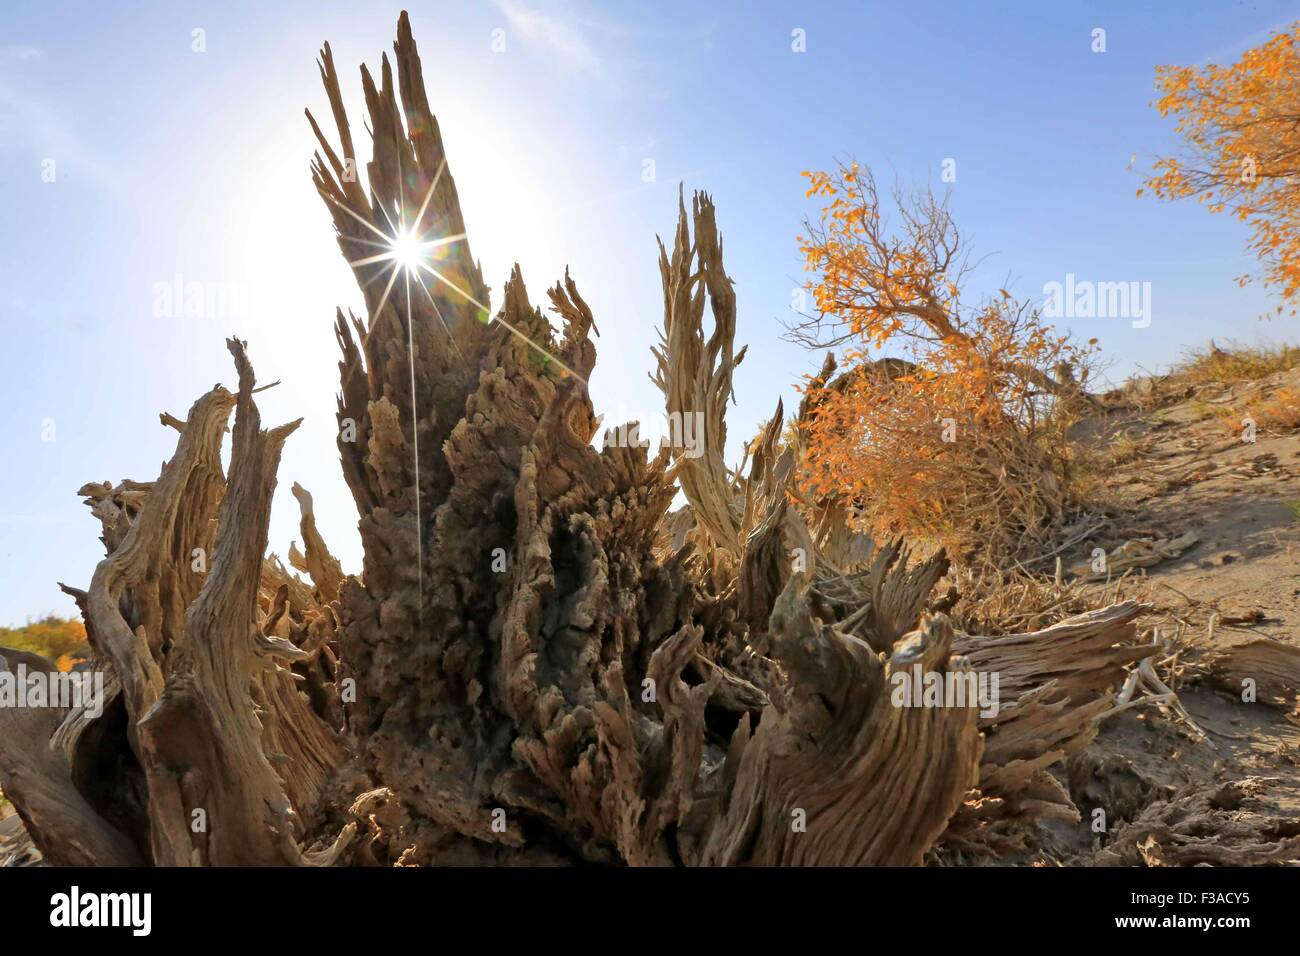 (151003) -- HAMI, Oct. 3, 2015 (Xinhua) -- Populus diversifolia trees are seen at Nom of Yiwu County of Hami, northwest China's Xinjiang Uygur Autonomous Region, Oct. 2, 2015. Autumn is the best season in China to enjoy the golden colour of the populus diversifolia trees.    (Xinhua/Cai Zengle) (zhs) Stock Photo